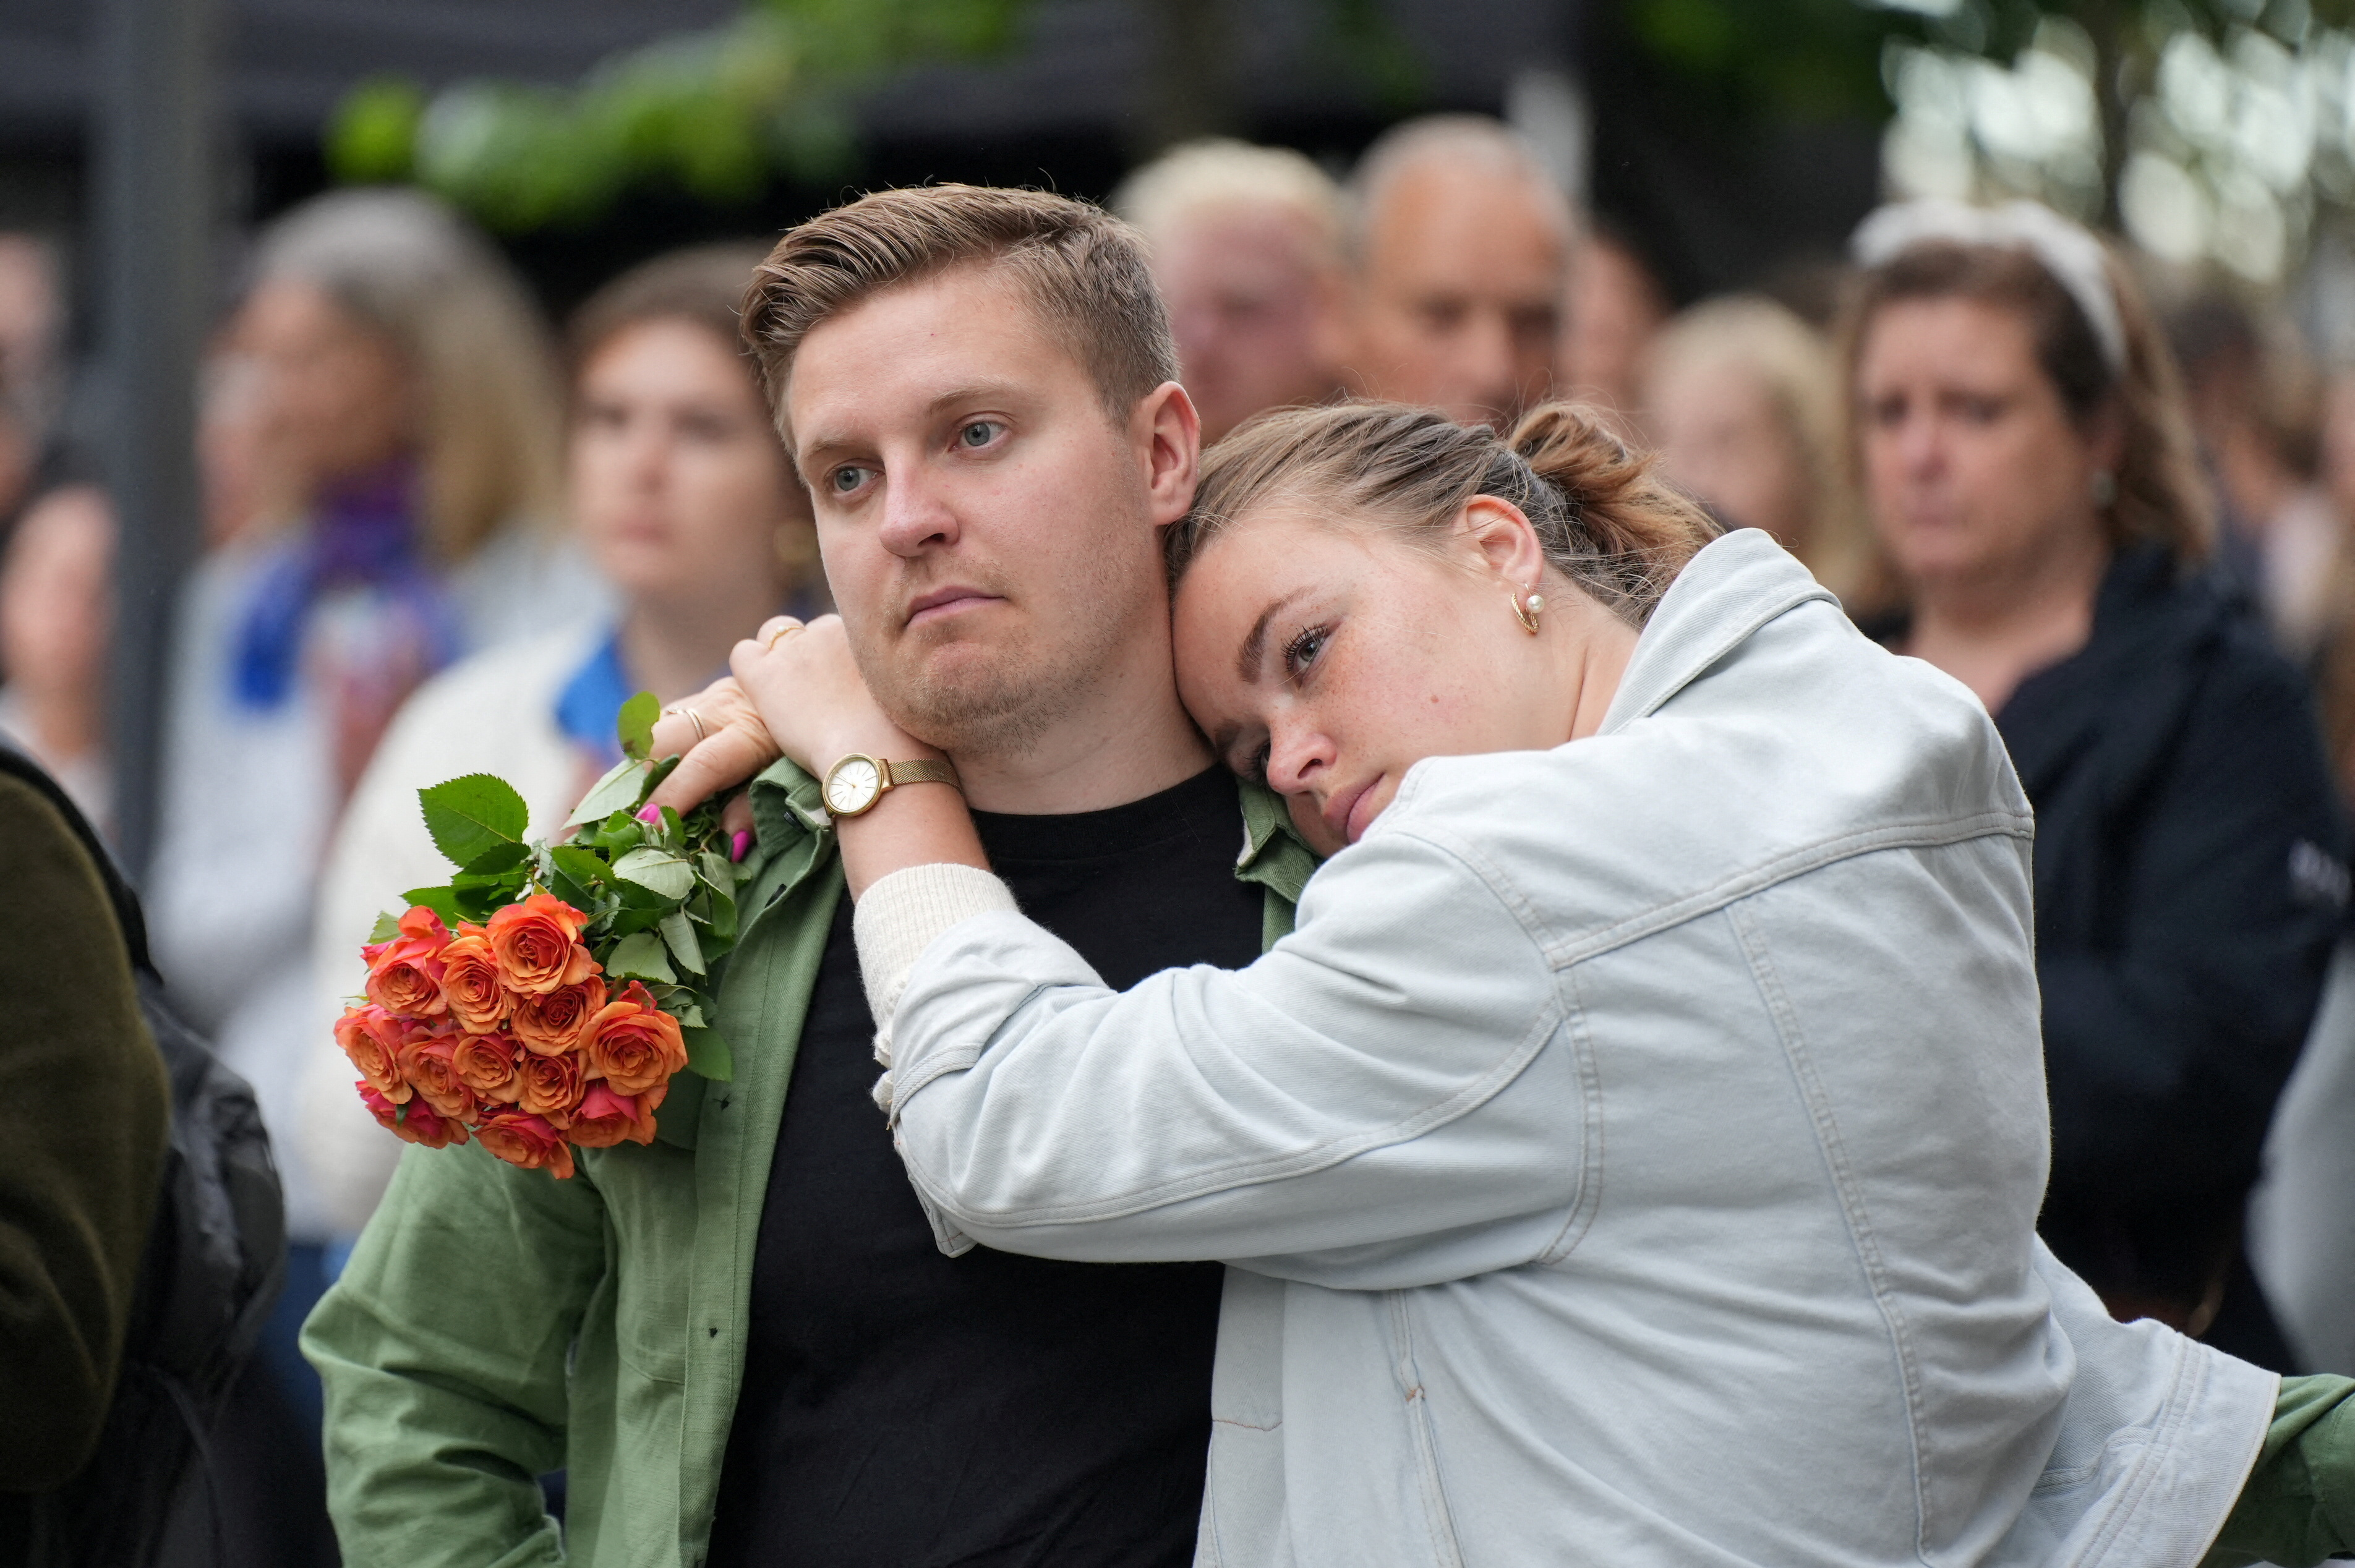 Memorial service for victims of shooting at shopping center